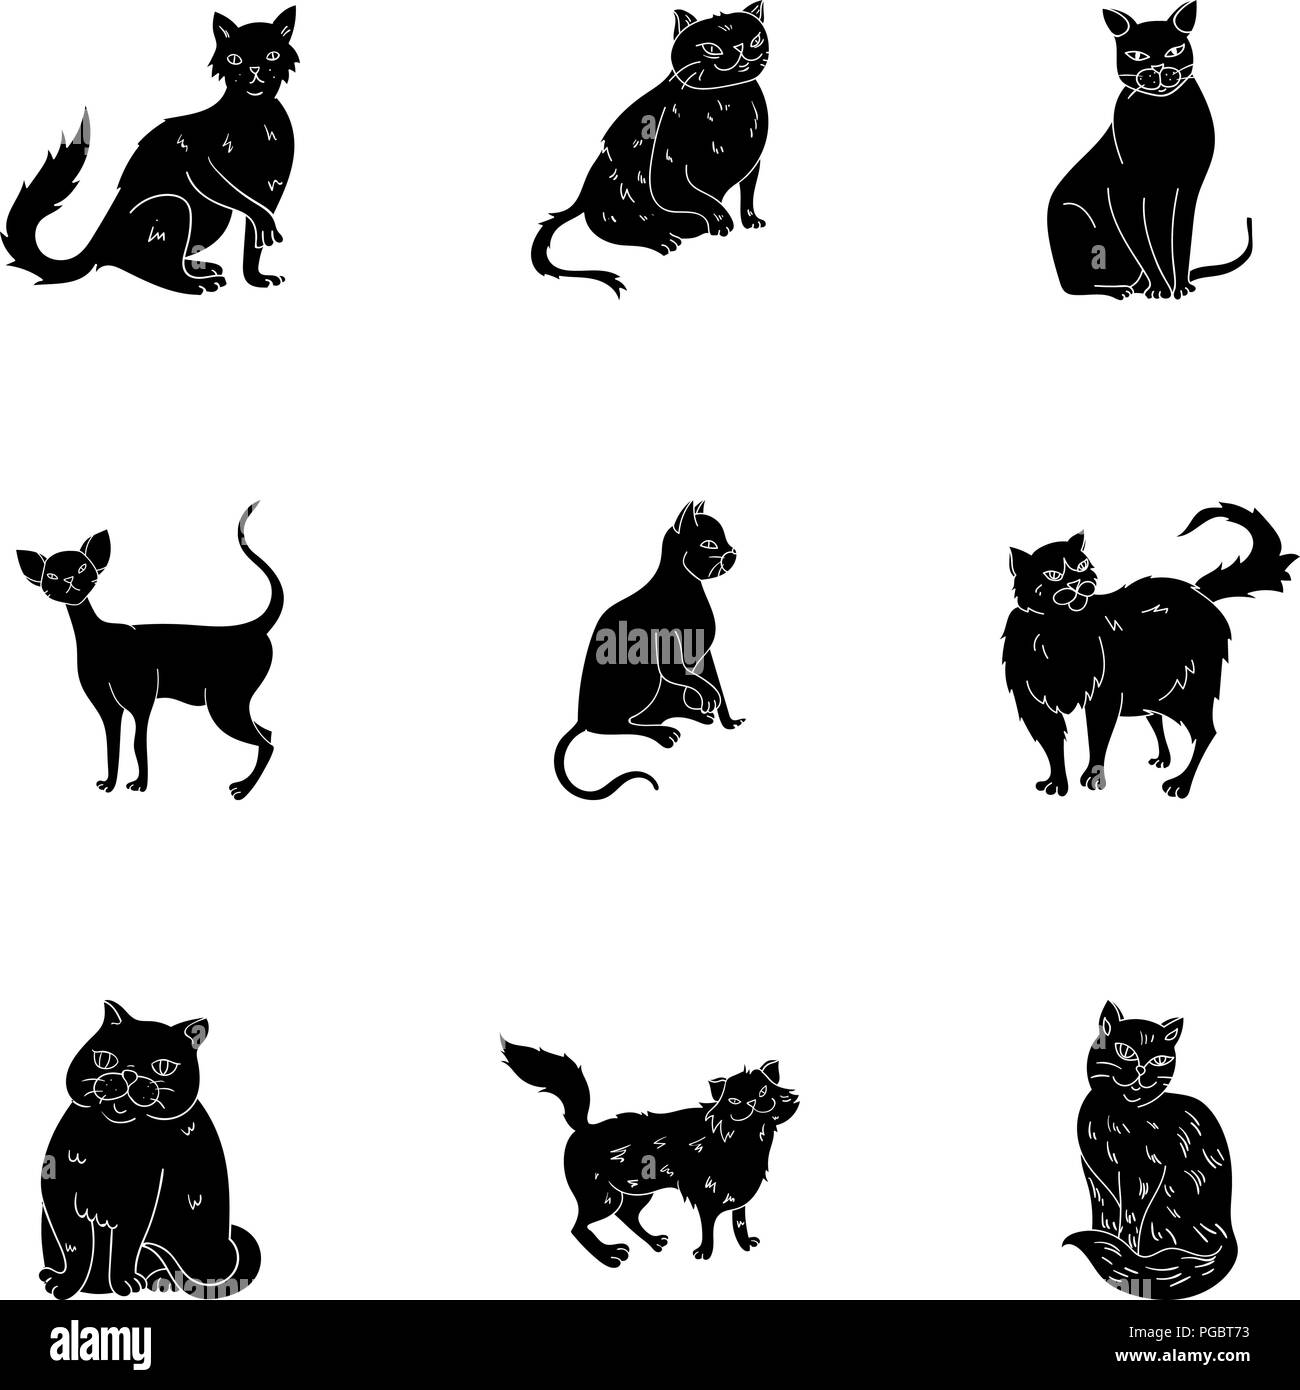 bald,black,cat,cats,chest,collection,curly,different,ears,egyptian,evil,fat,good,gray,icon,illustration,isolated,leopard,logo,neck,object,one,picture,set,sign,sphinx,spotted,striped,symbol,tail,thin,vector,web,white, Vector Vectors , Stock Vector